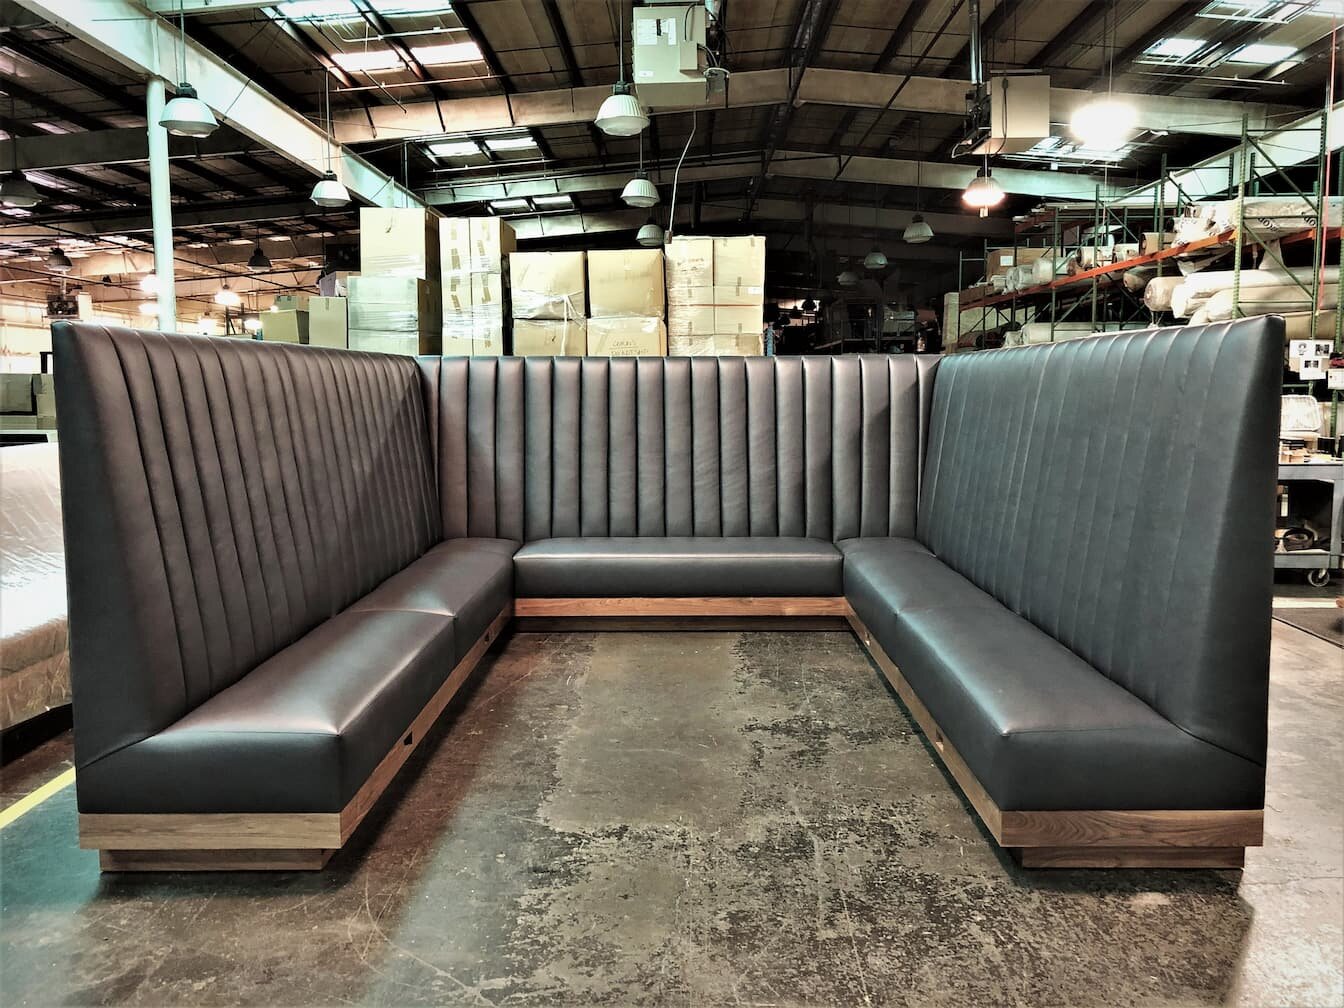 Corn Upholstery -A comparison between coil springs and sinuous, no sag  springs. | Corn Upholstery Built-In Seating, Custom Booths, Banquette  Seating, and Hospitality Furniture